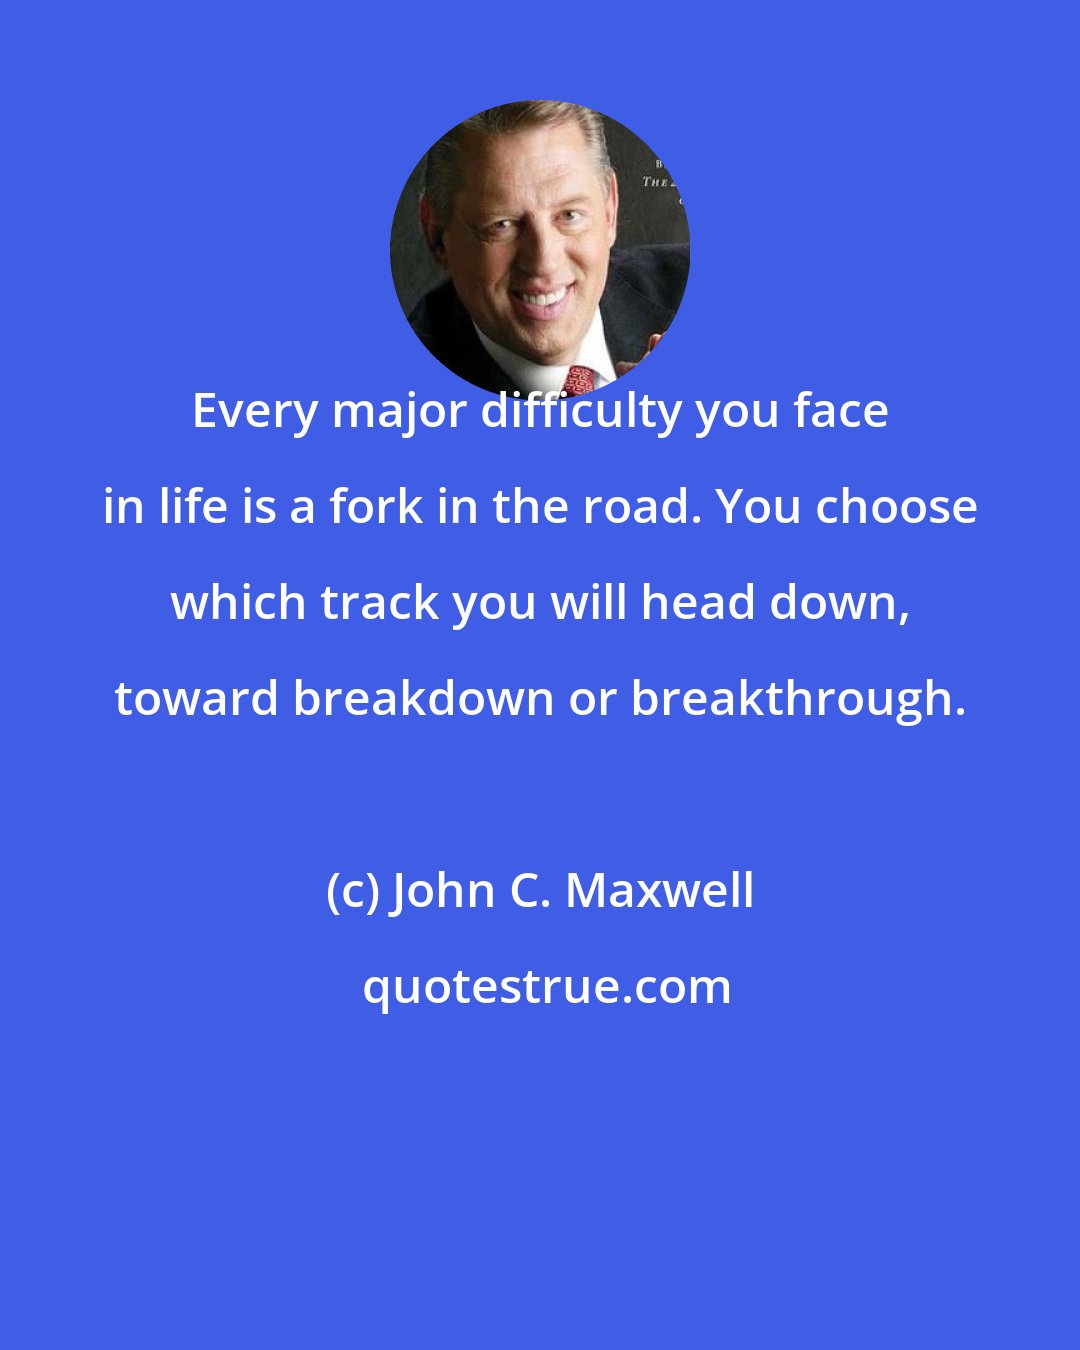 John C. Maxwell: Every major difficulty you face in life is a fork in the road. You choose which track you will head down, toward breakdown or breakthrough.